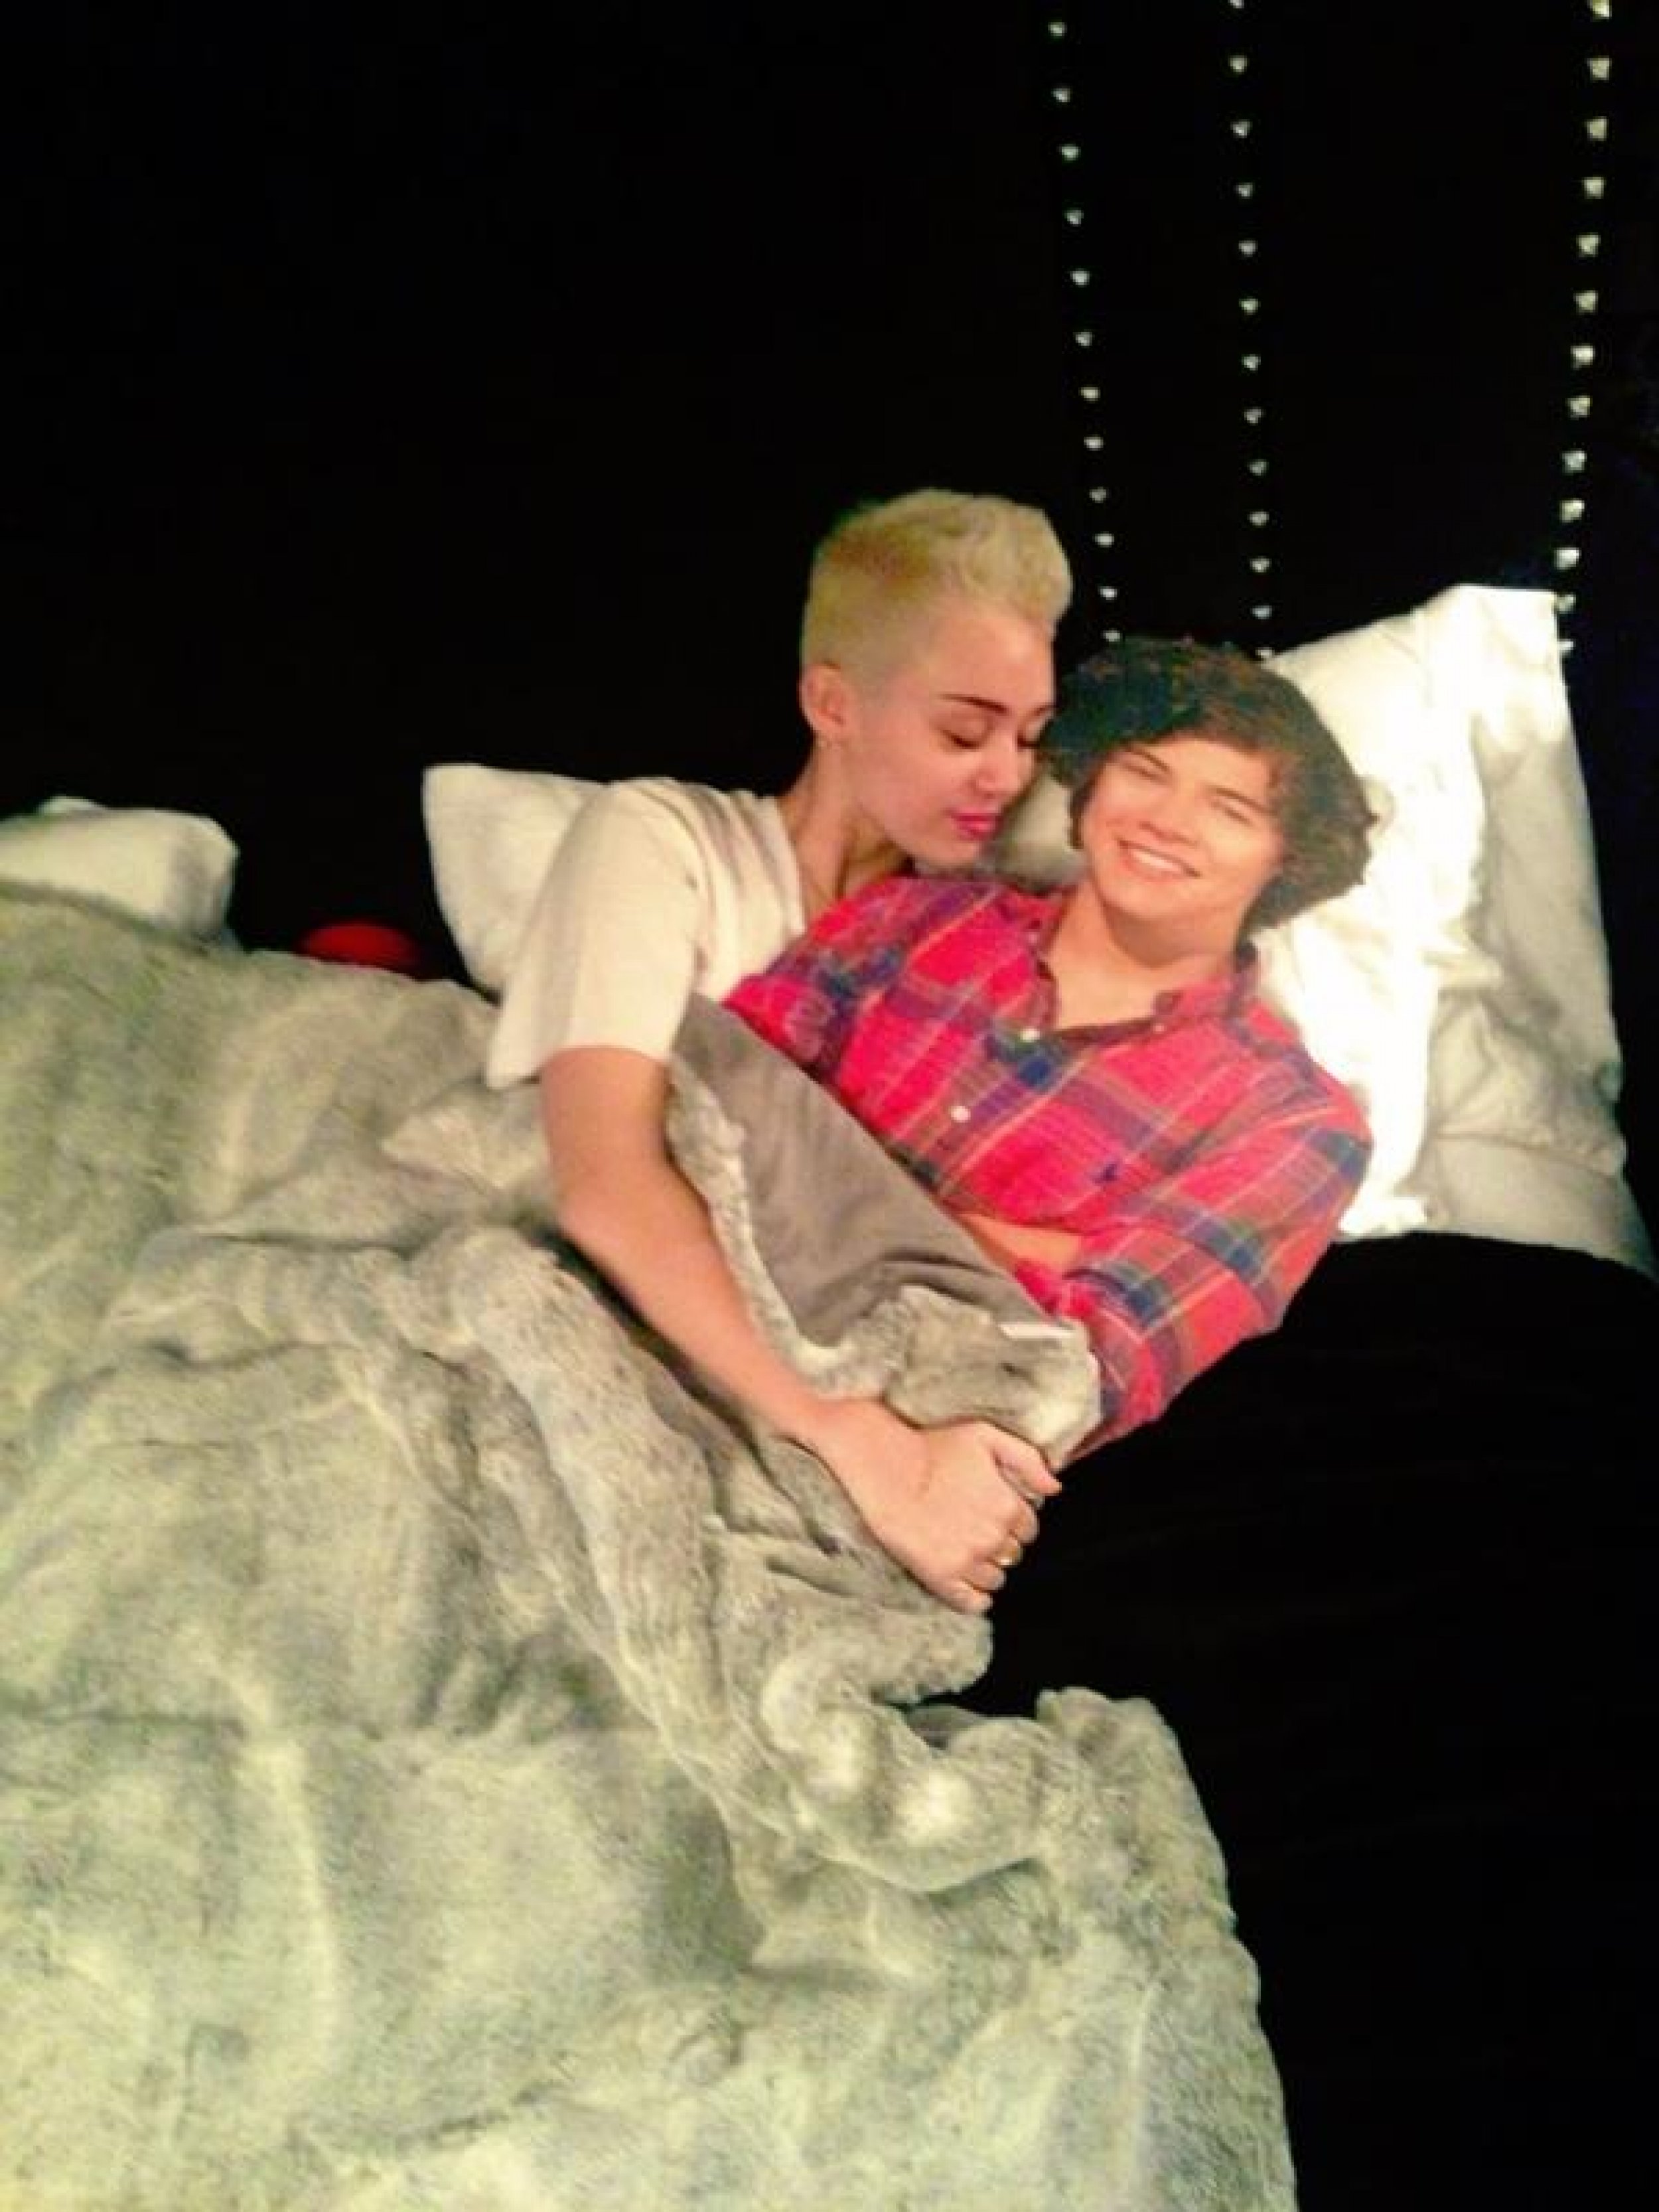 Miley Cyrus Takes Photos In Bed With Harry Styles Of One Direction